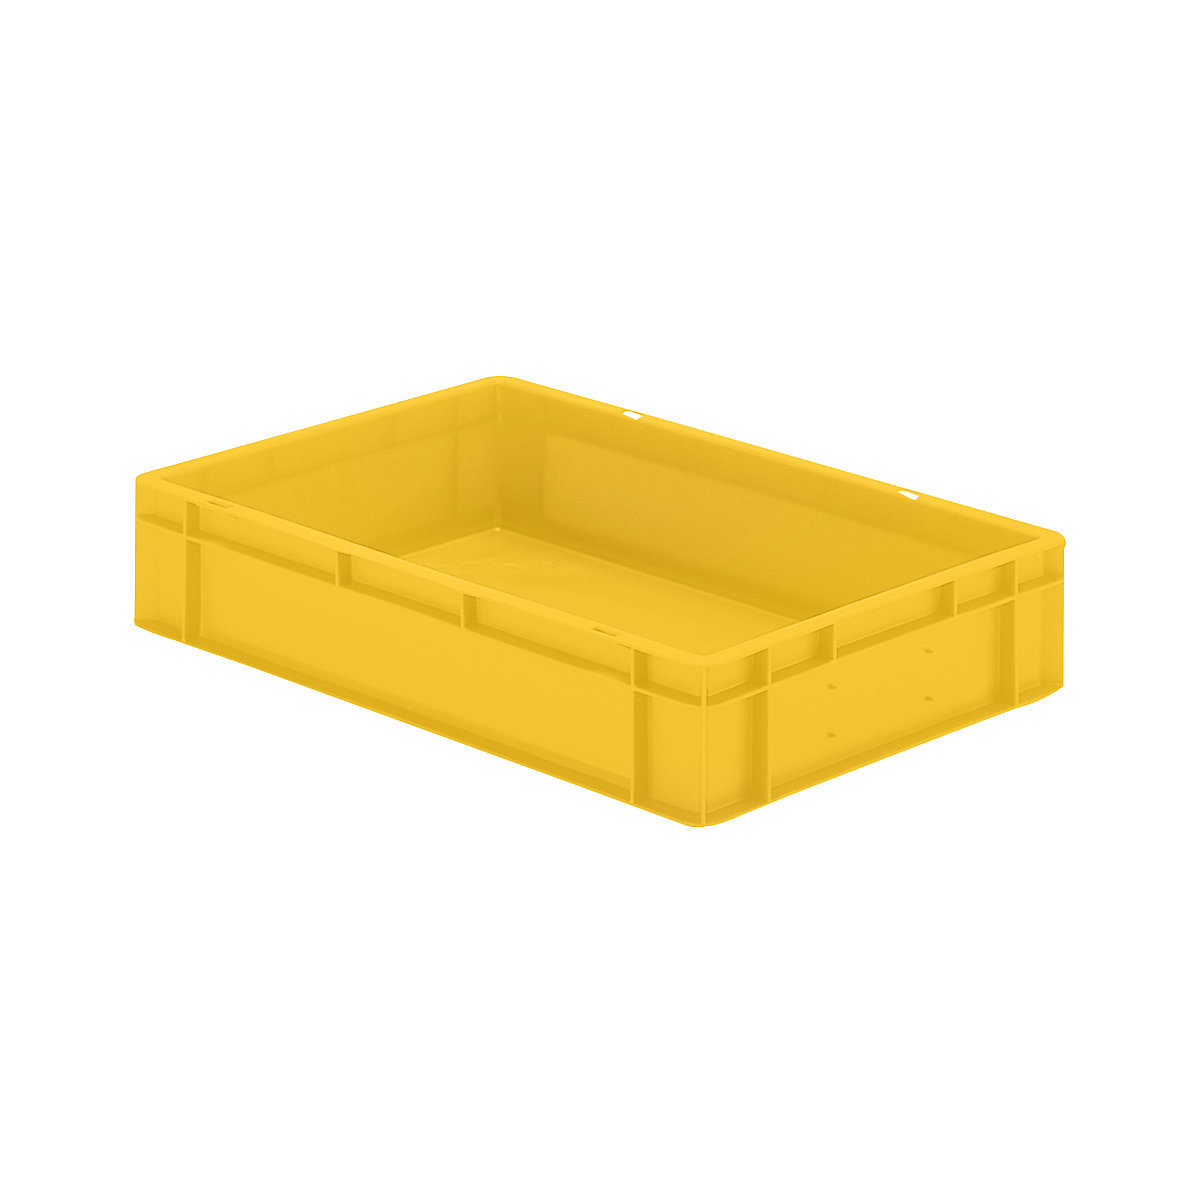 Euro stacking container, closed walls and base, LxWxH 600 x 400 x 120 mm, yellow, pack of 5